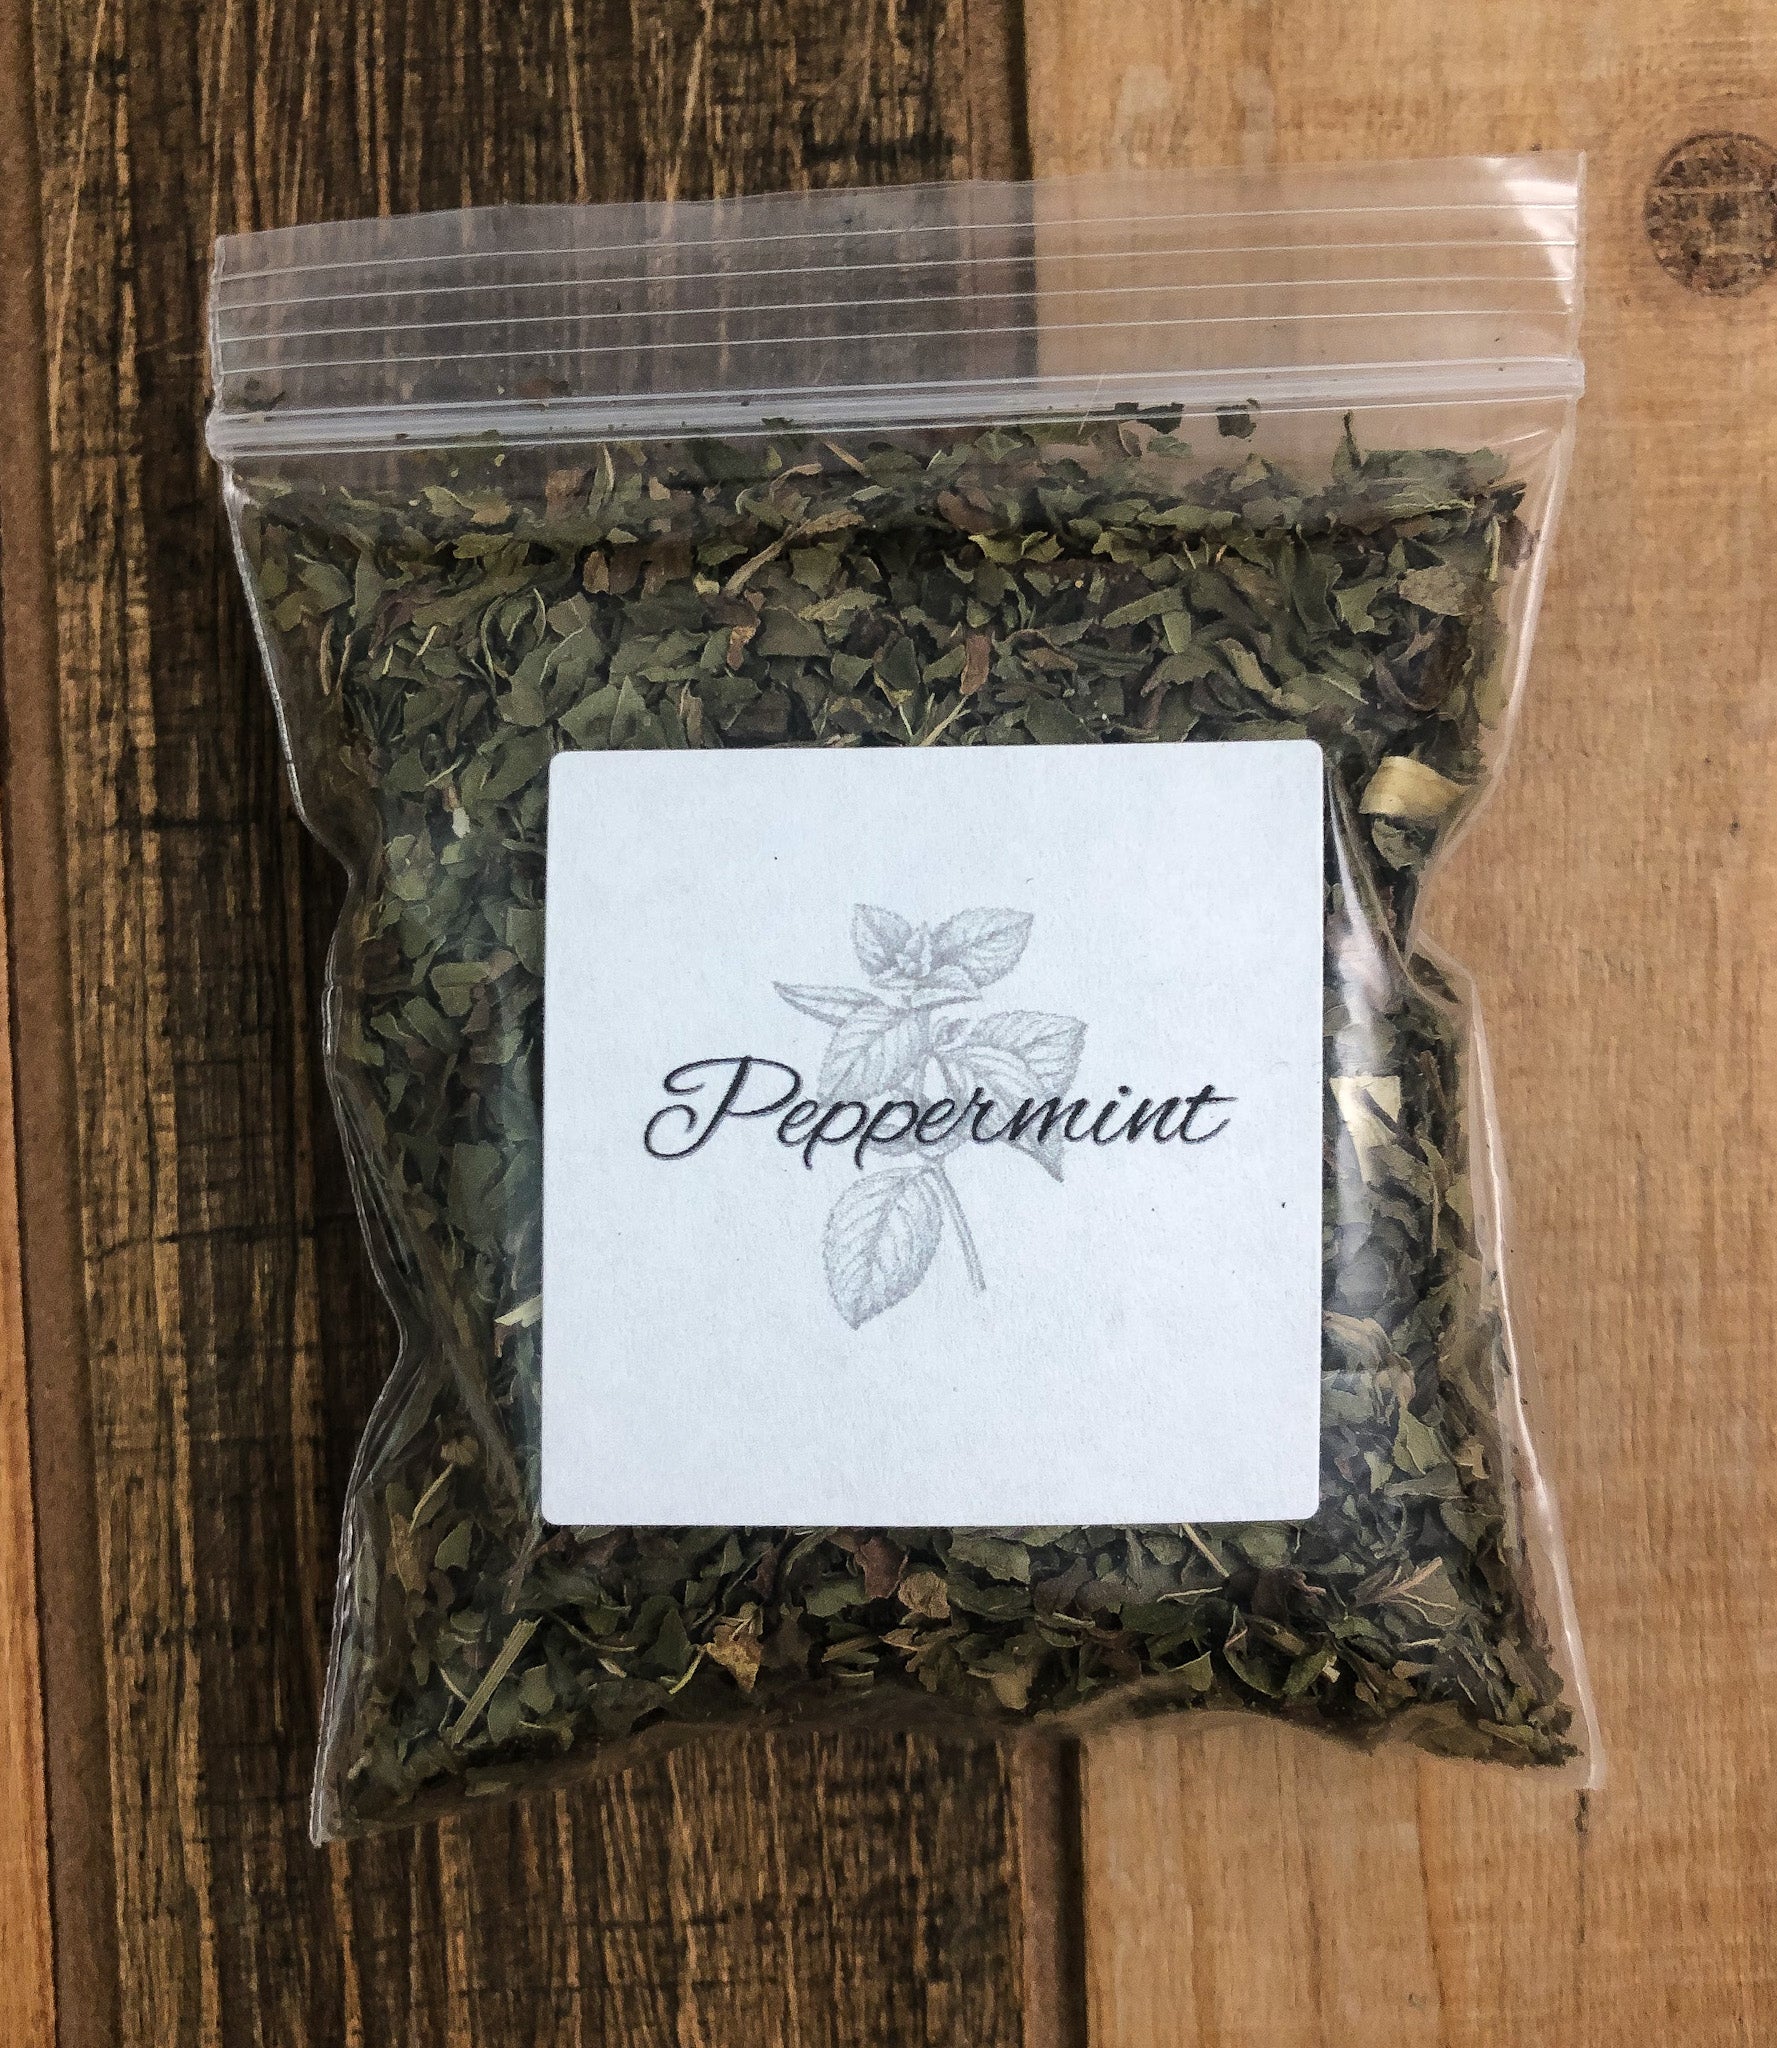 8g bag of dried peppermint in a clear plastic bag with a wooden background